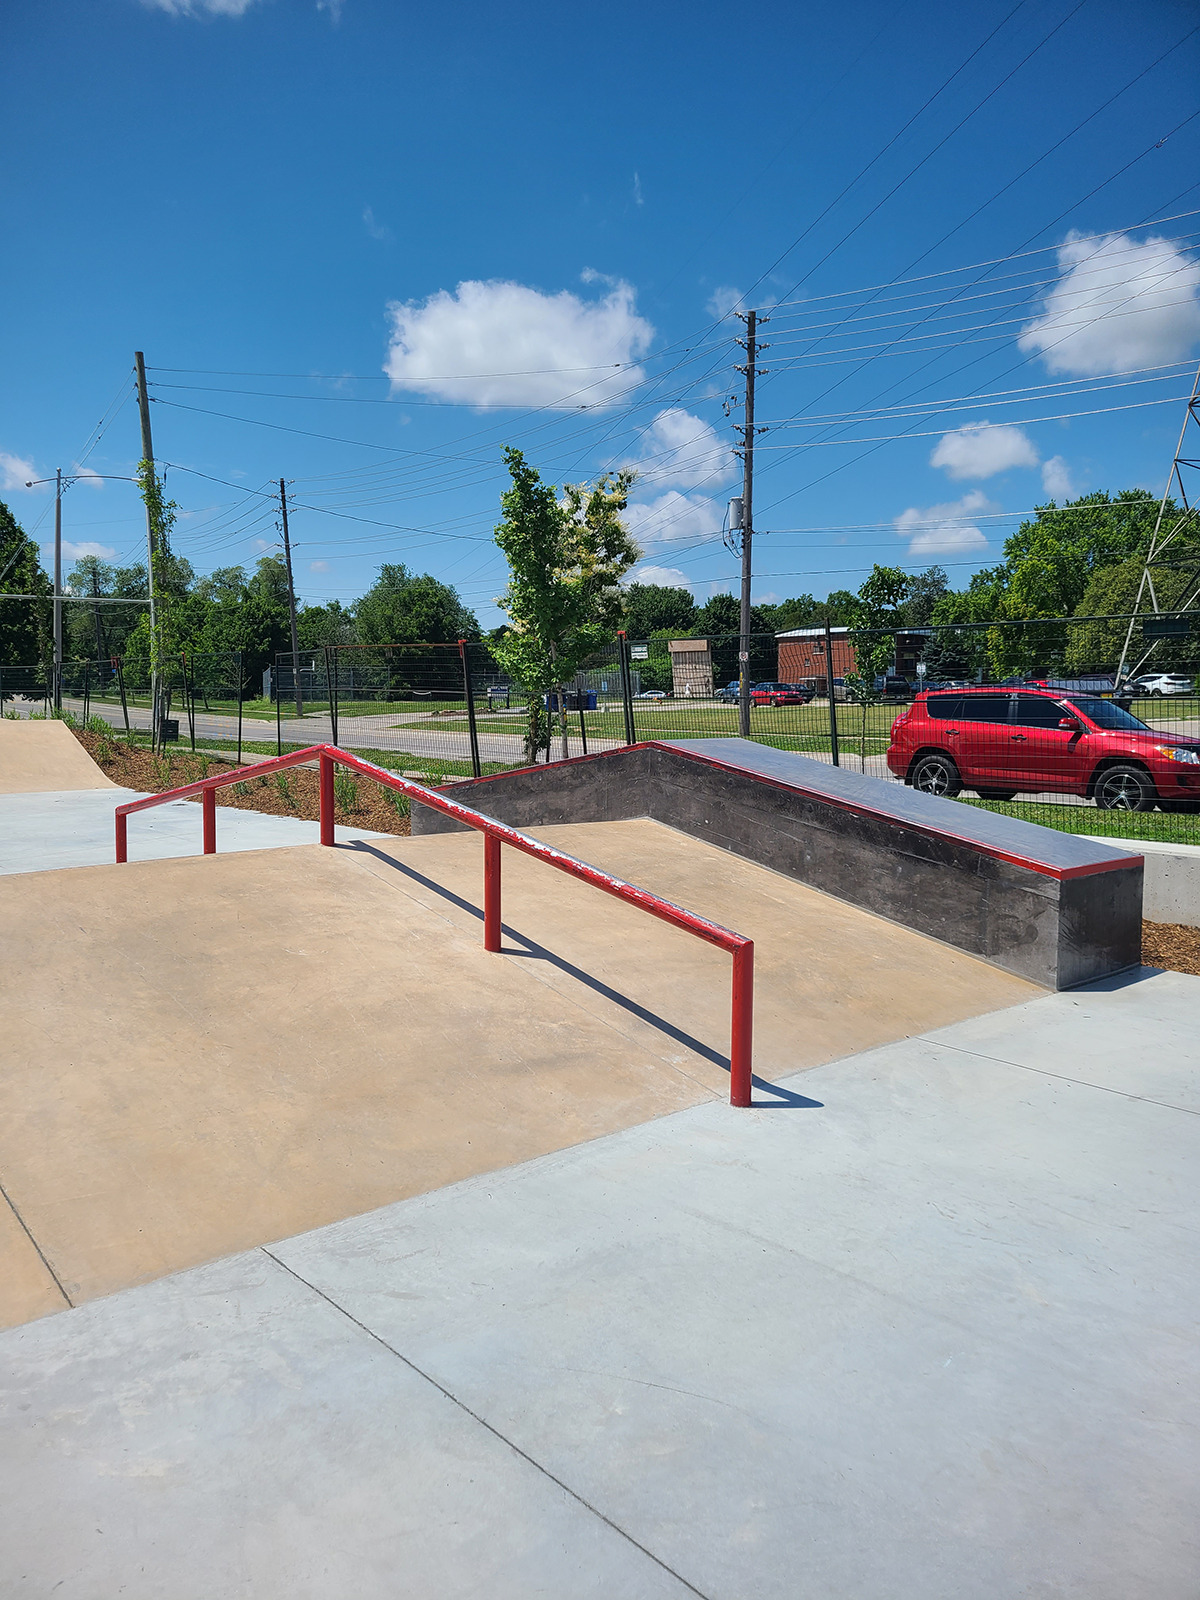 Albert McCormick Community Centre - Site Development: A skateboard ramp with red rails is being added to the centre's recreational facilities.